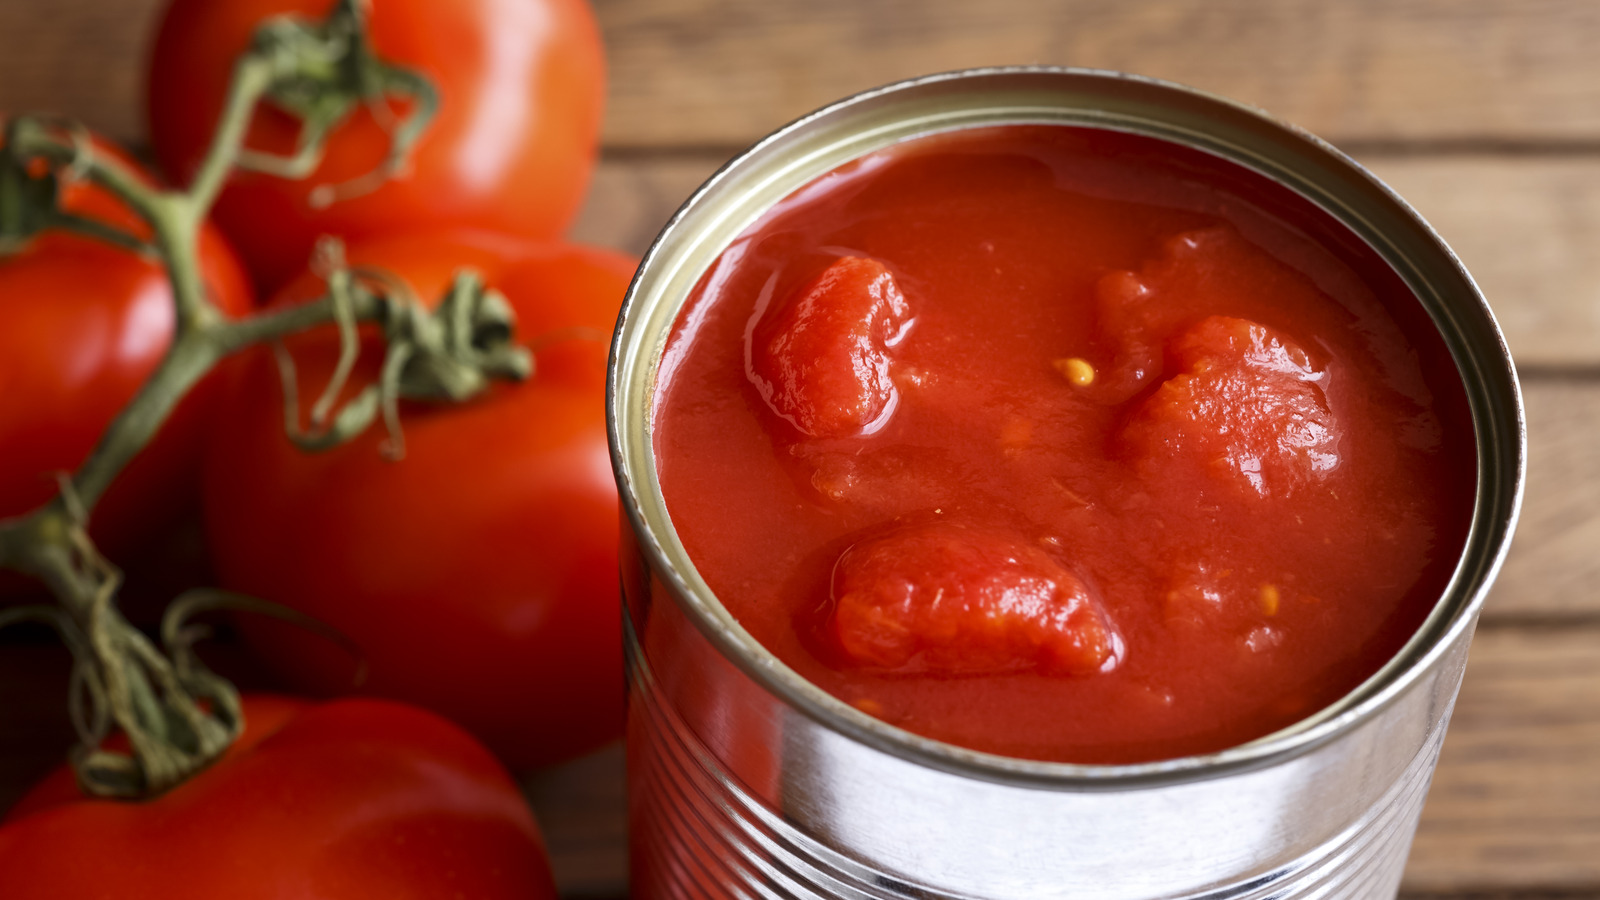 An Easy Step to Upgrade Canned Tomatoes Without Extra Ingredients